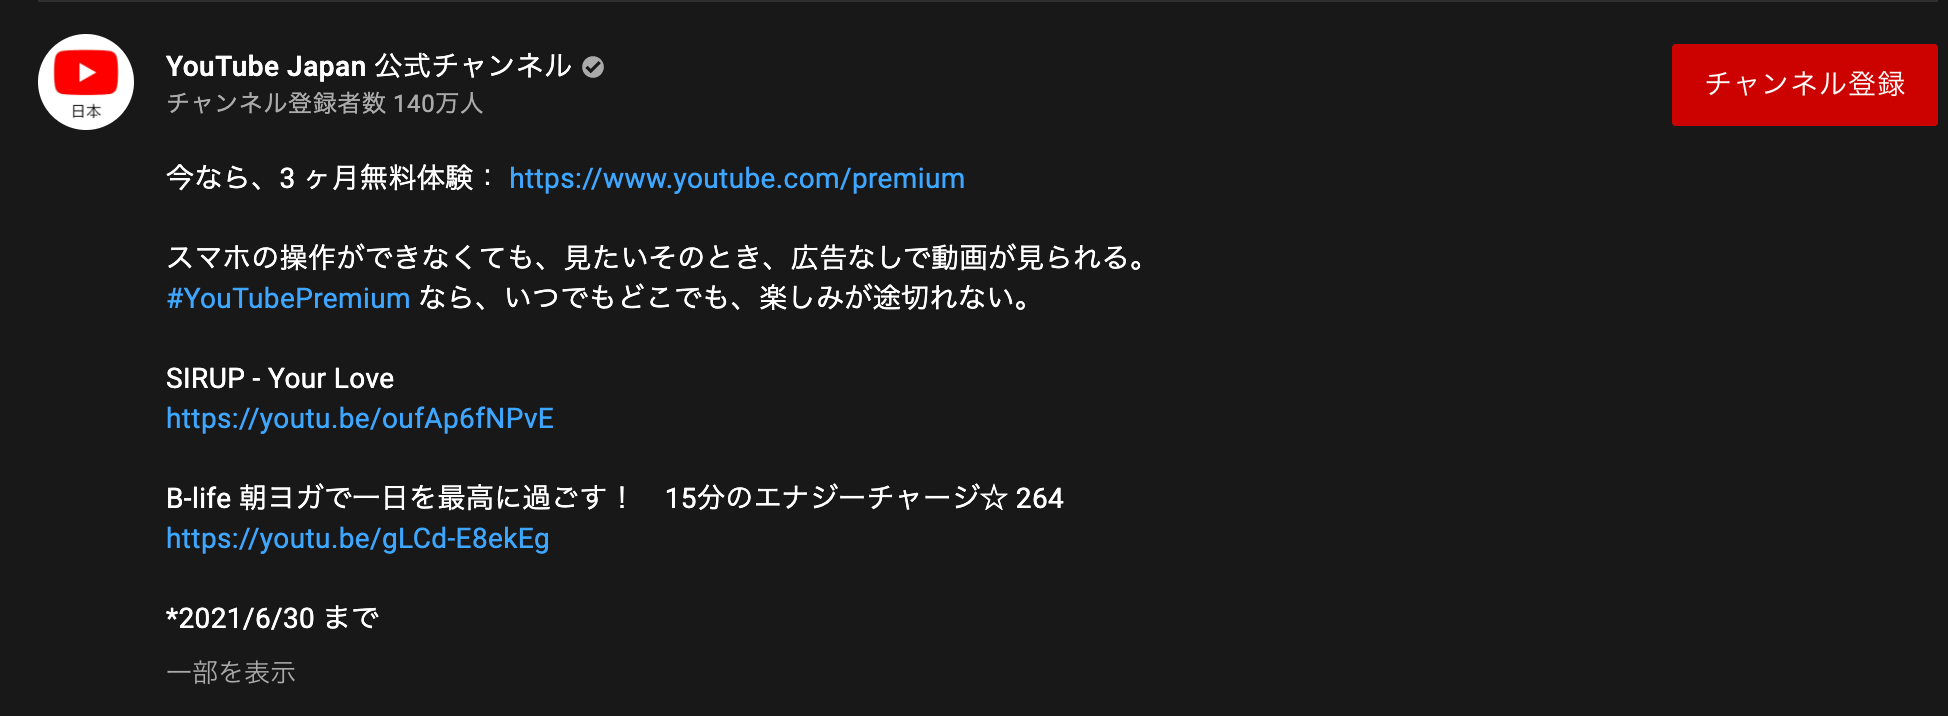 youtube-japan-official